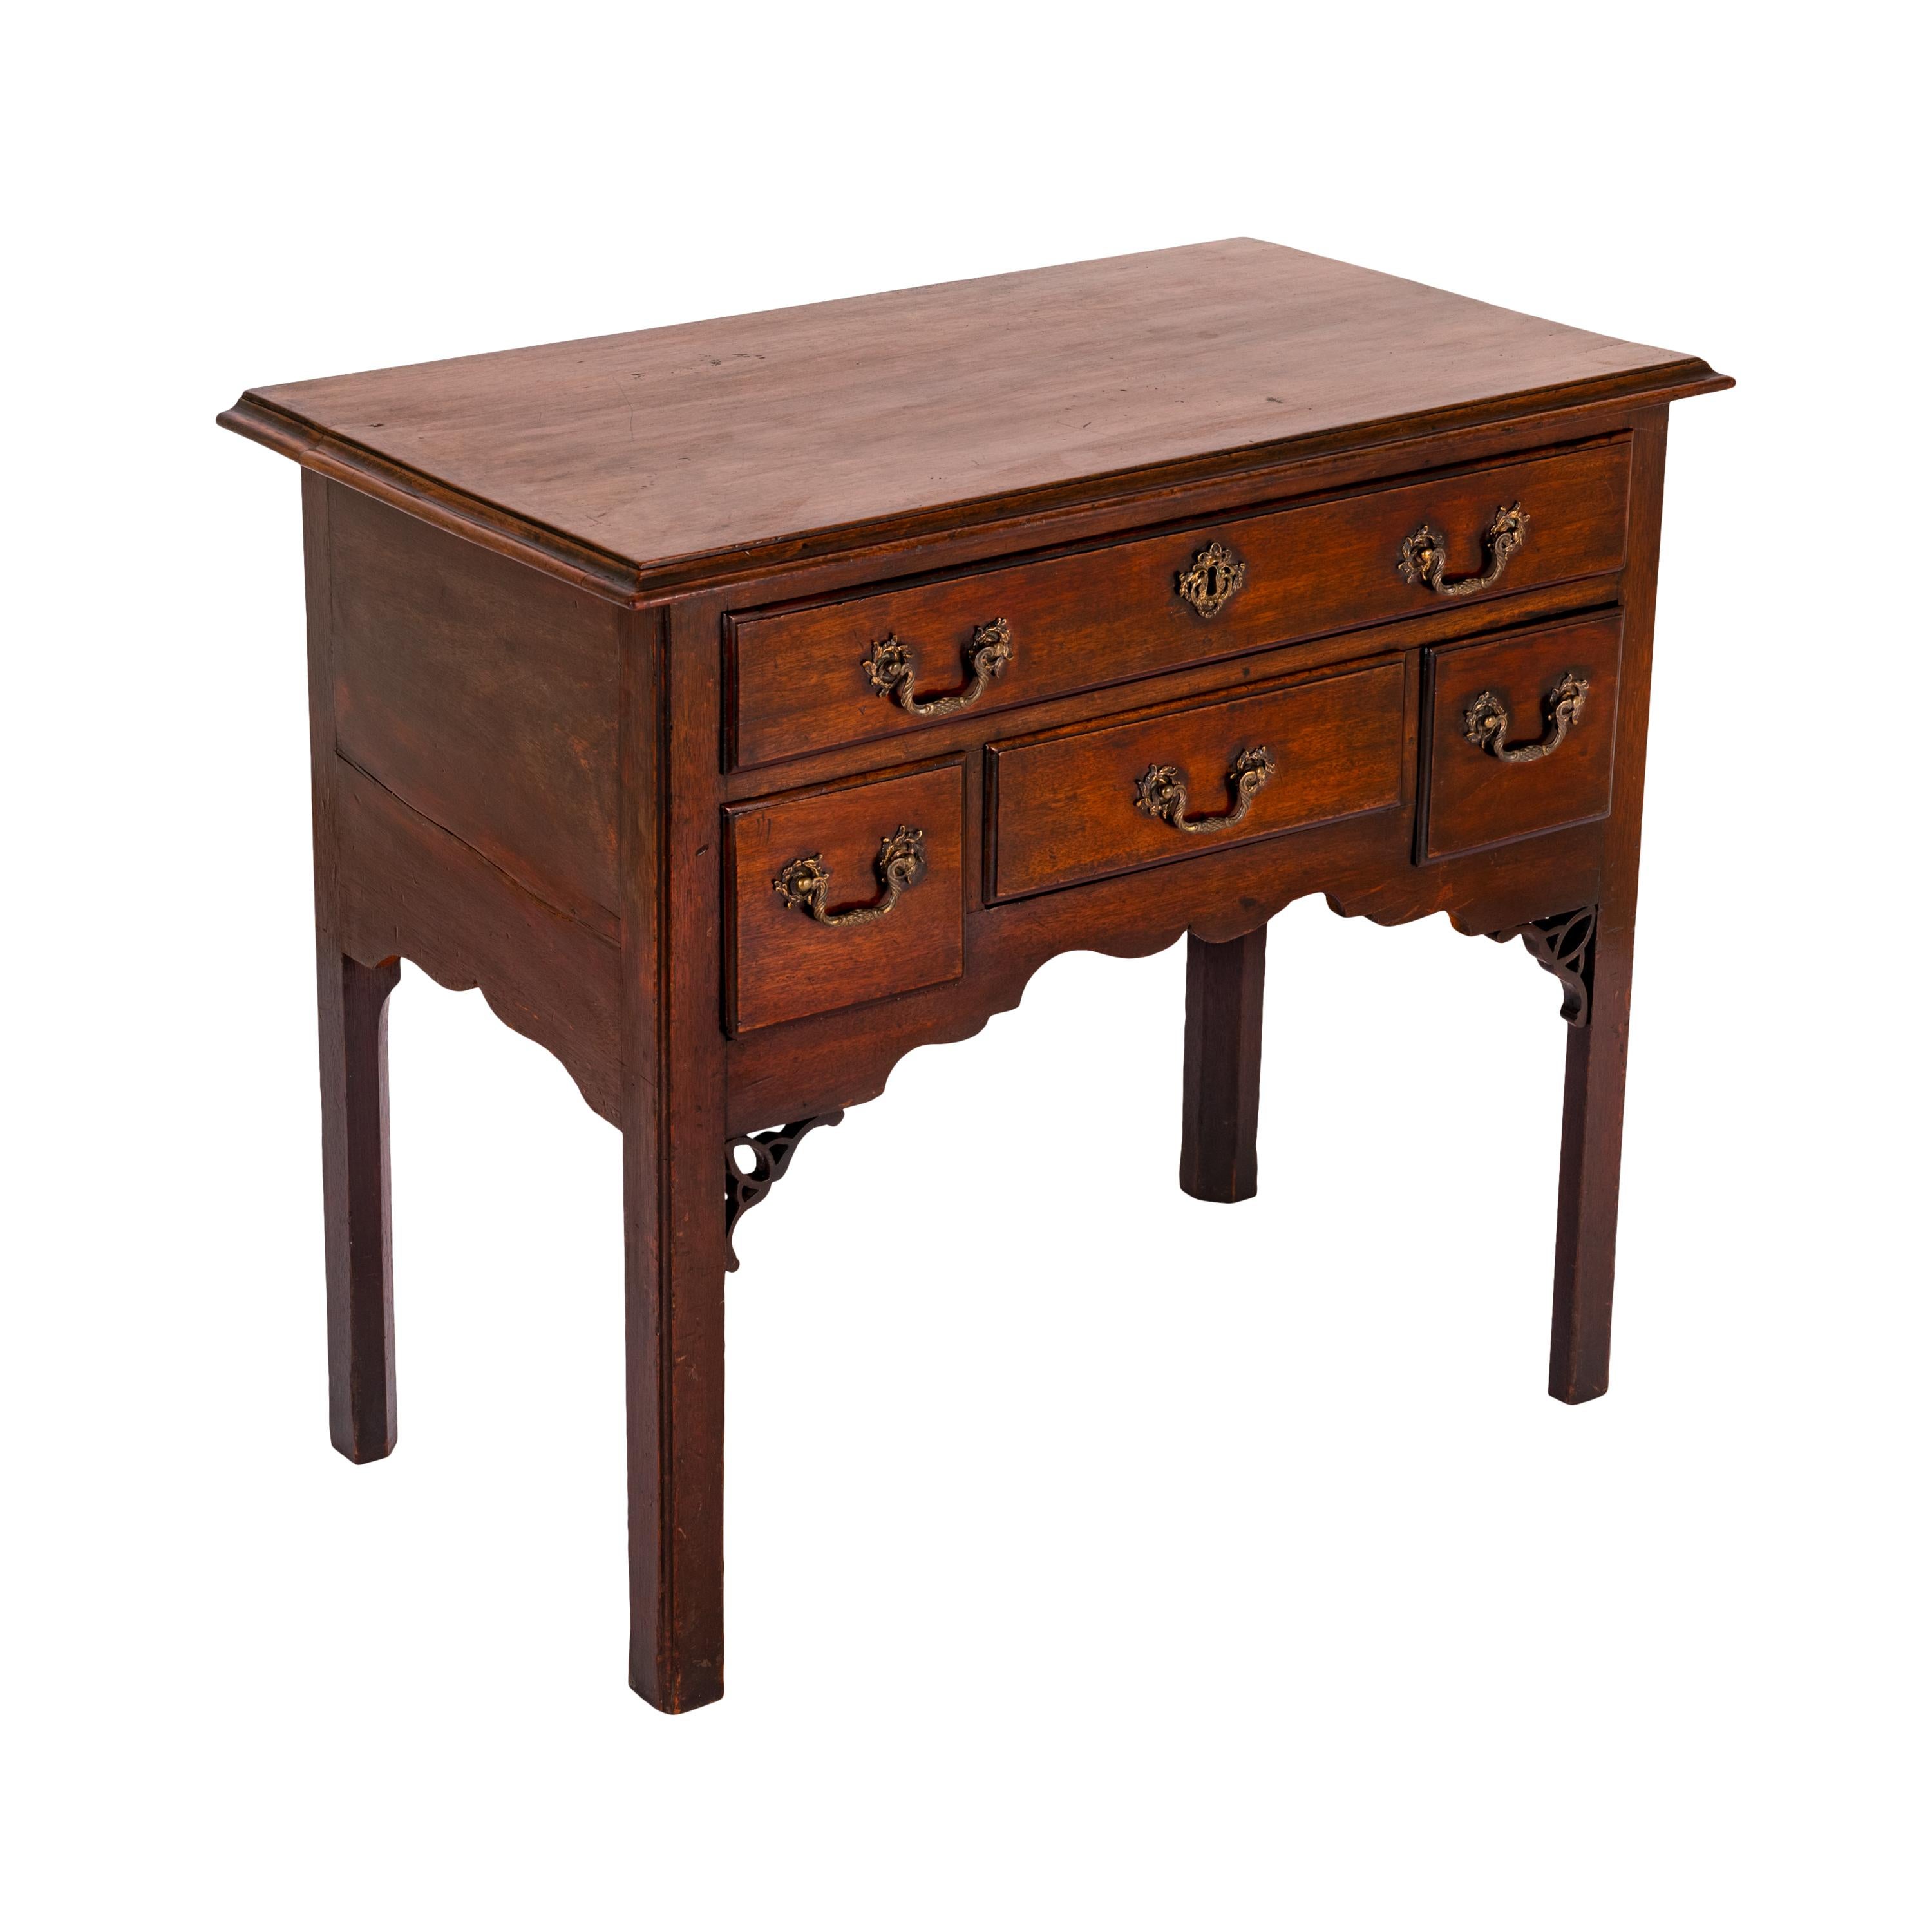 Antique English 18th C Georgian Mahogany Chippendale Lowboy Side Table 1750 In Good Condition For Sale In Portland, OR